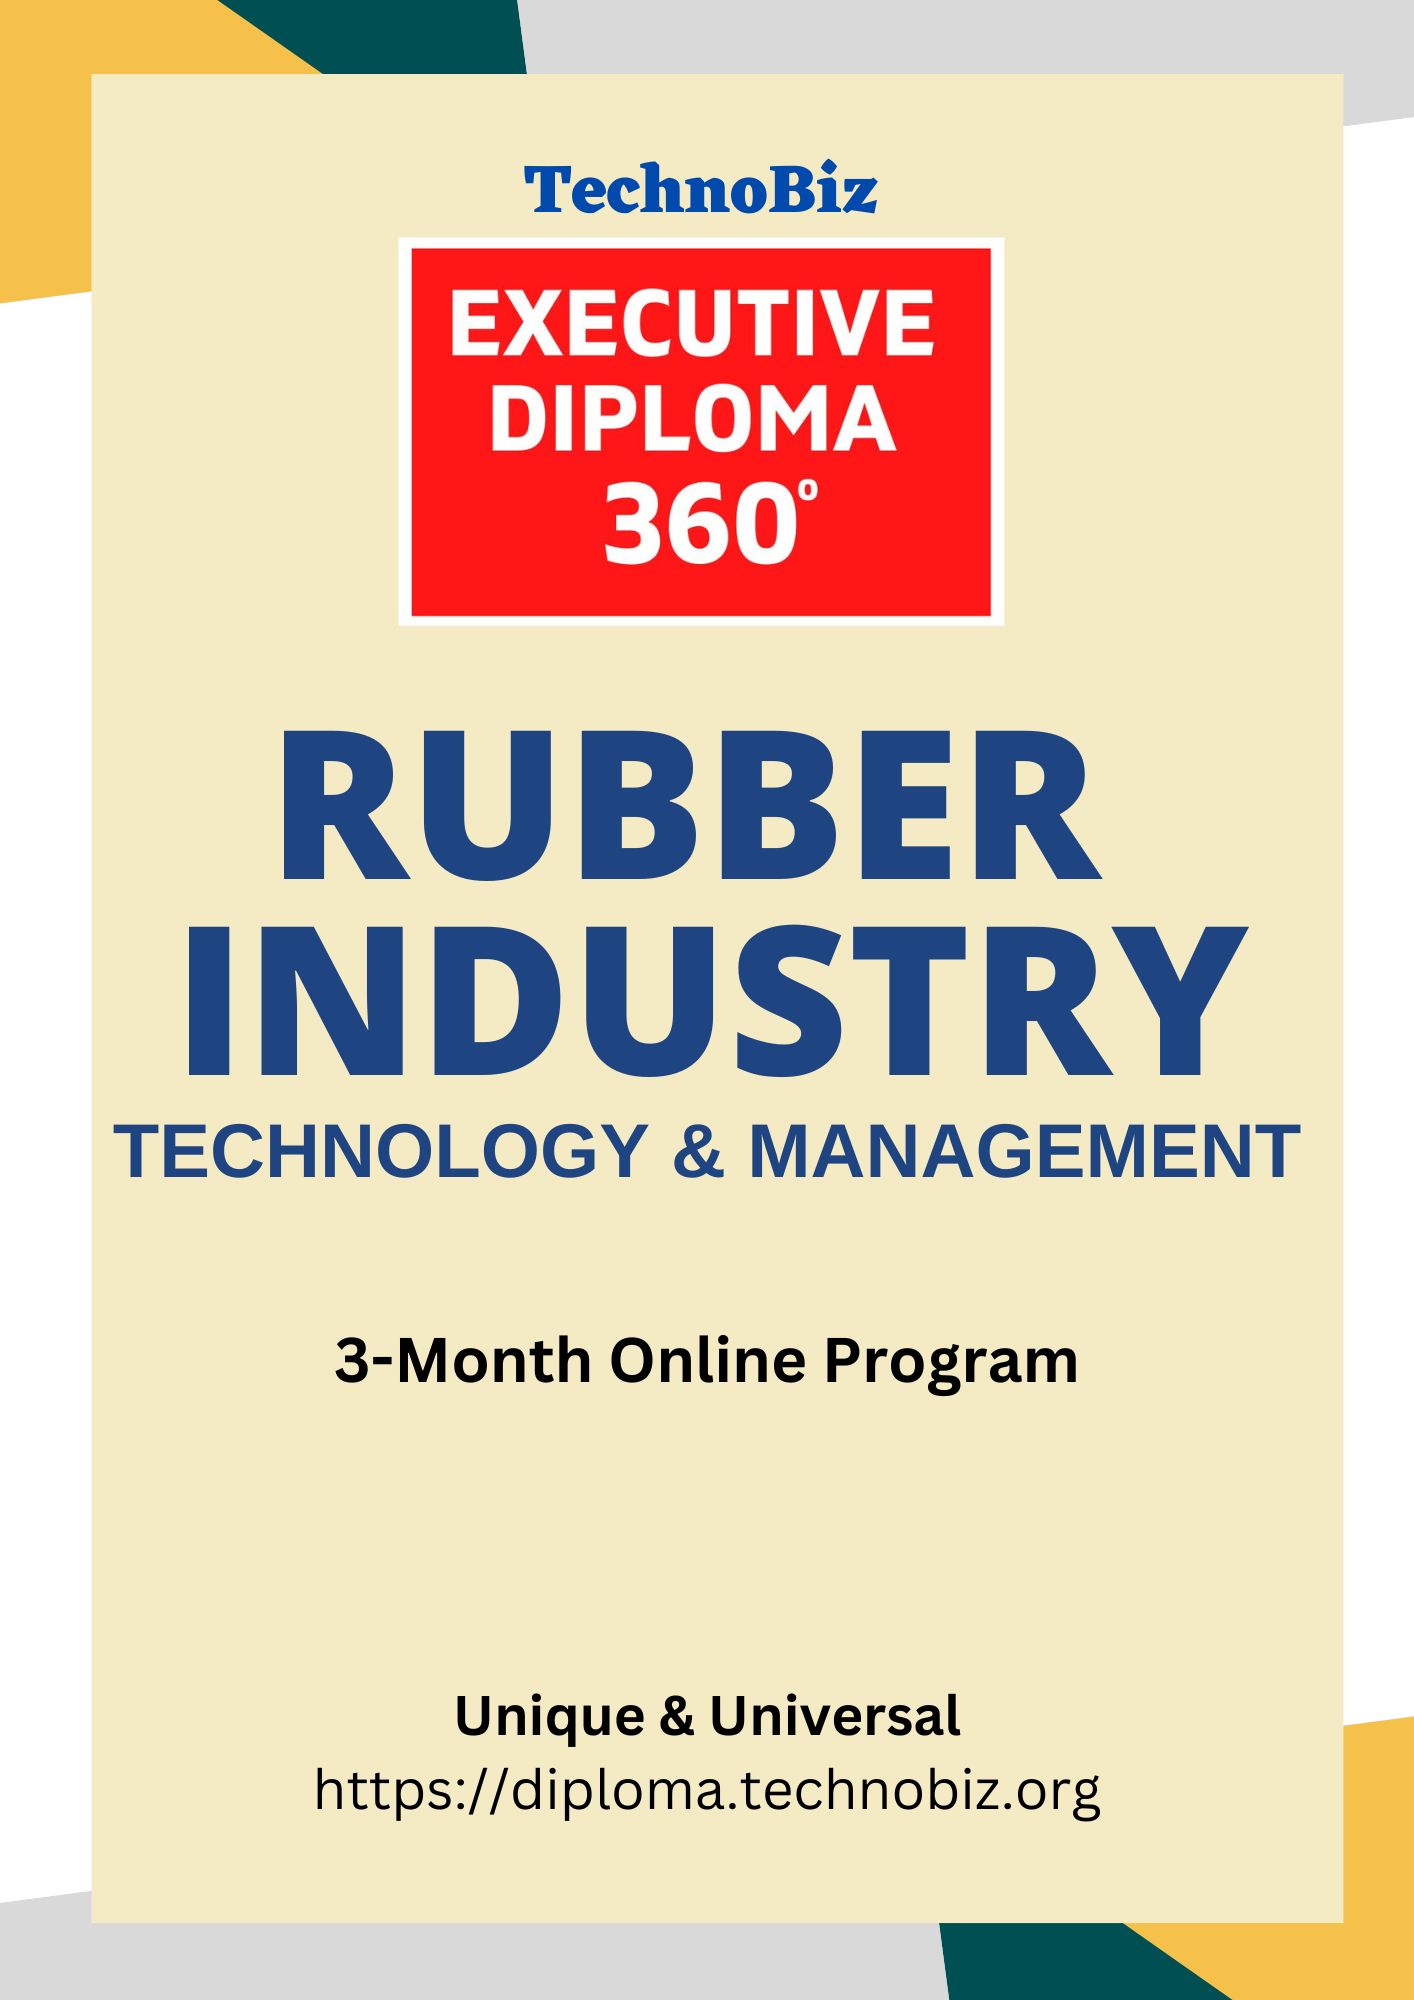 Executive Diploma 360o - Rubber Industry Technology & Management